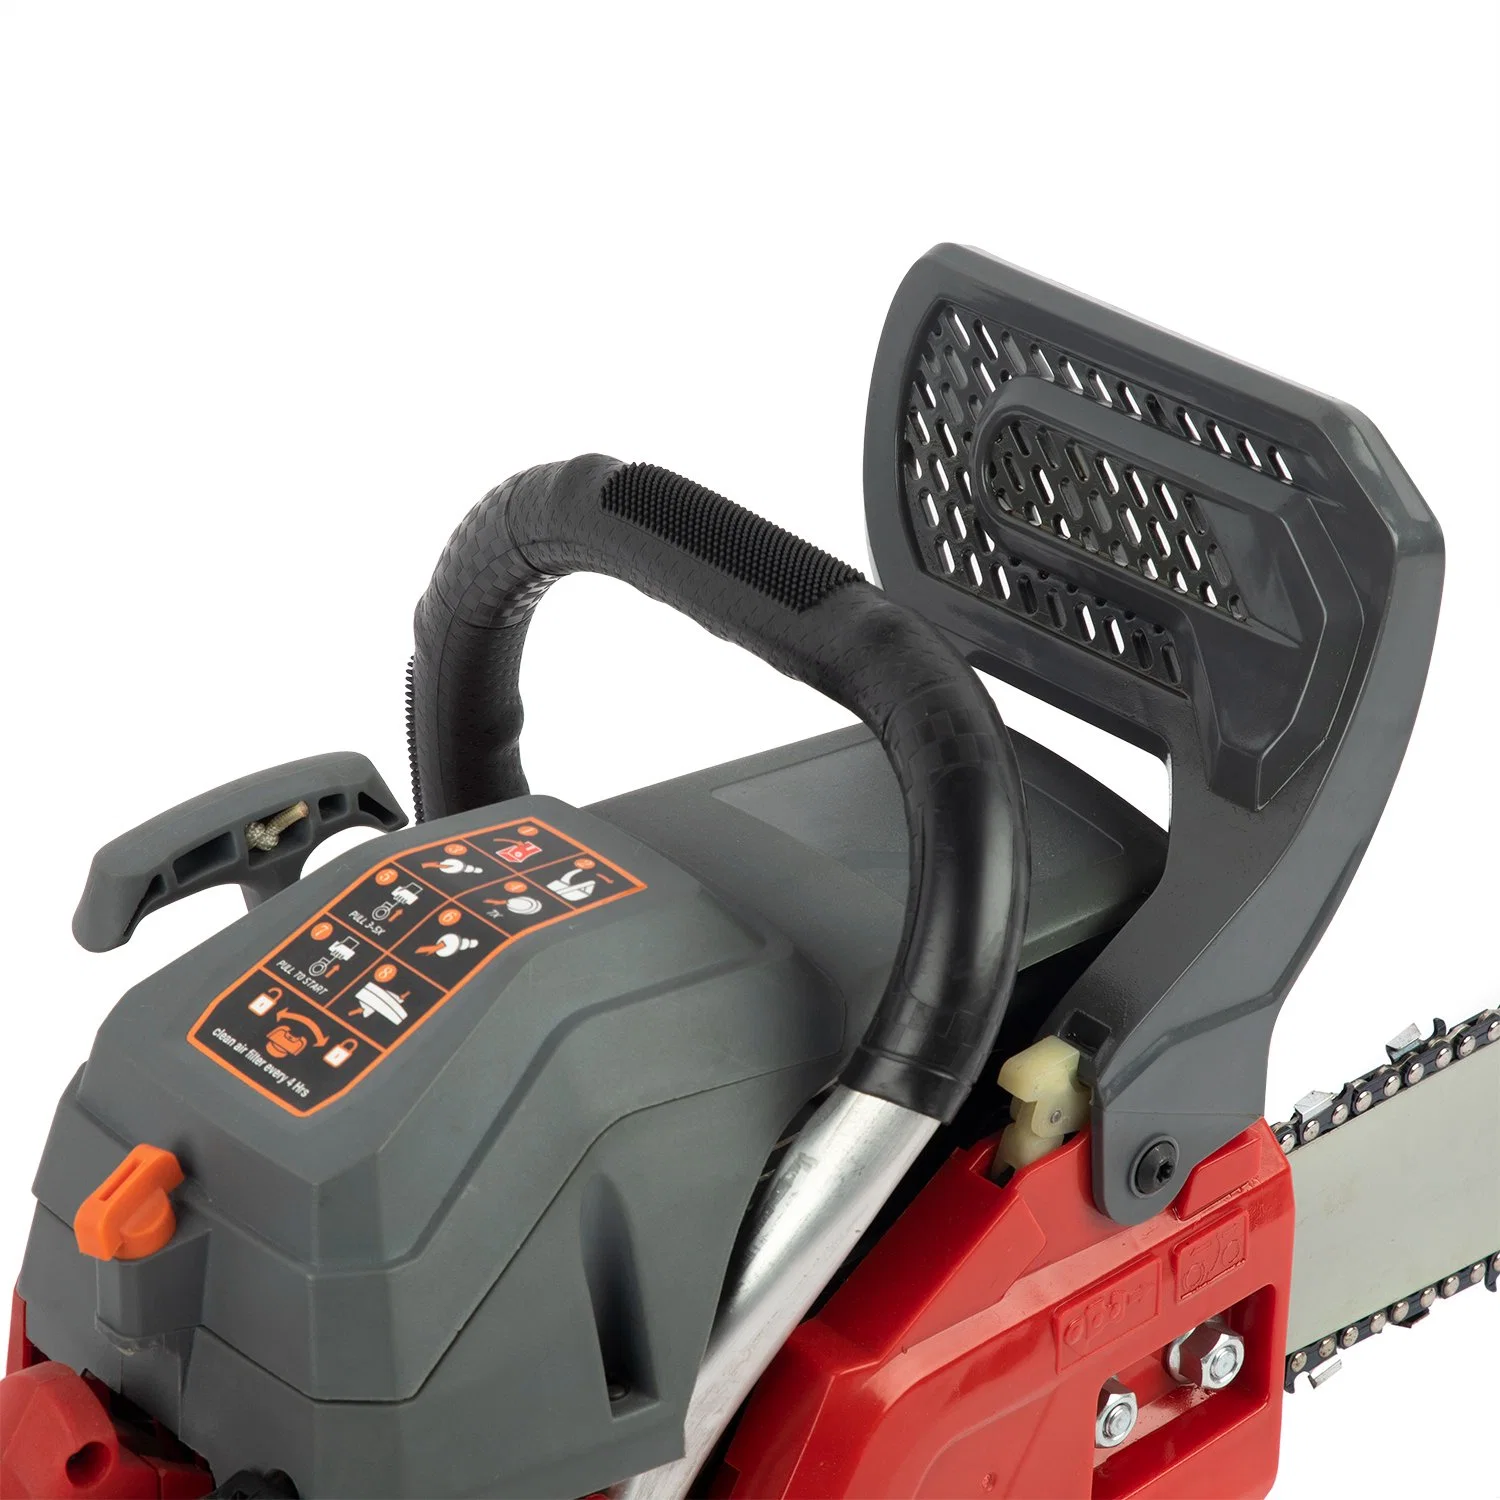 Factory New Design Wood Cutting Machine 25cc to 58cc Power Petrol Hand Chainsaw Diamond Gasoline Two Stroke Bar Chain Saw with Agricultural Machinery